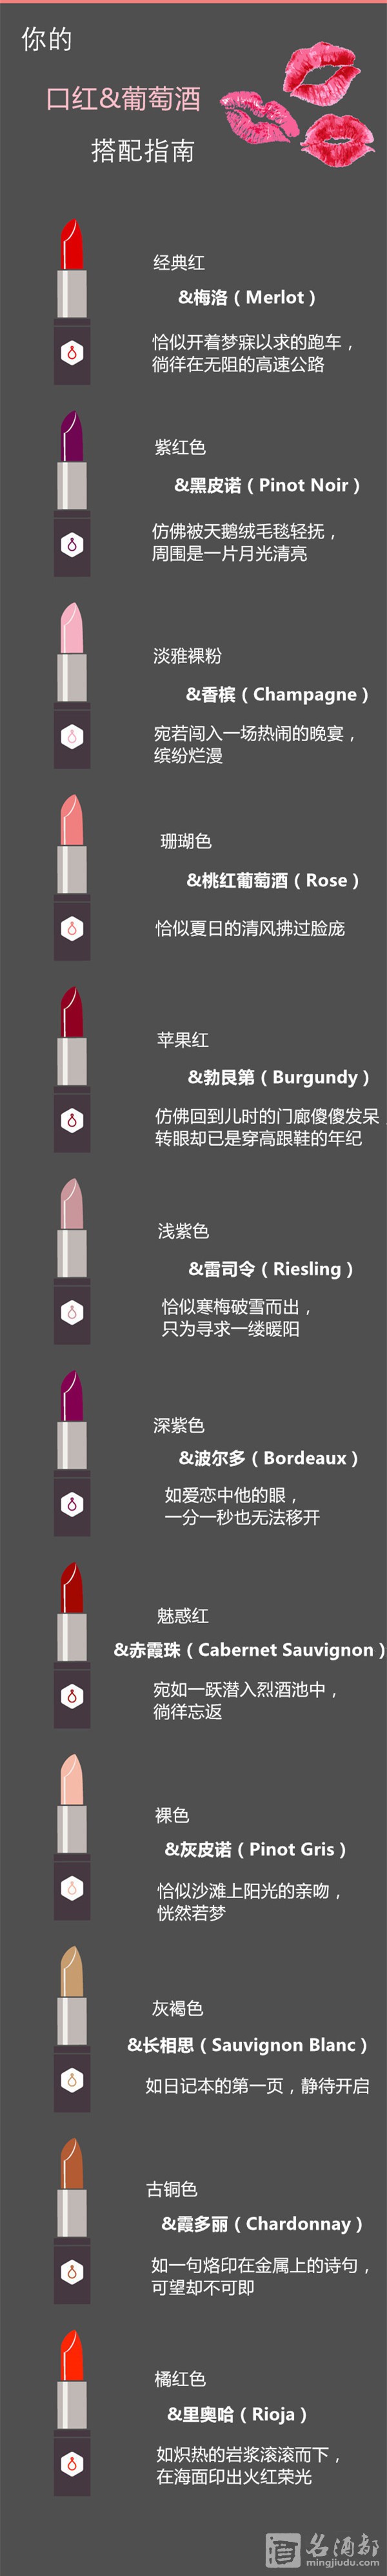 01-Your-Definitive-Guide-to-Pairing-Lipstick-with-Wine-20161230(1)